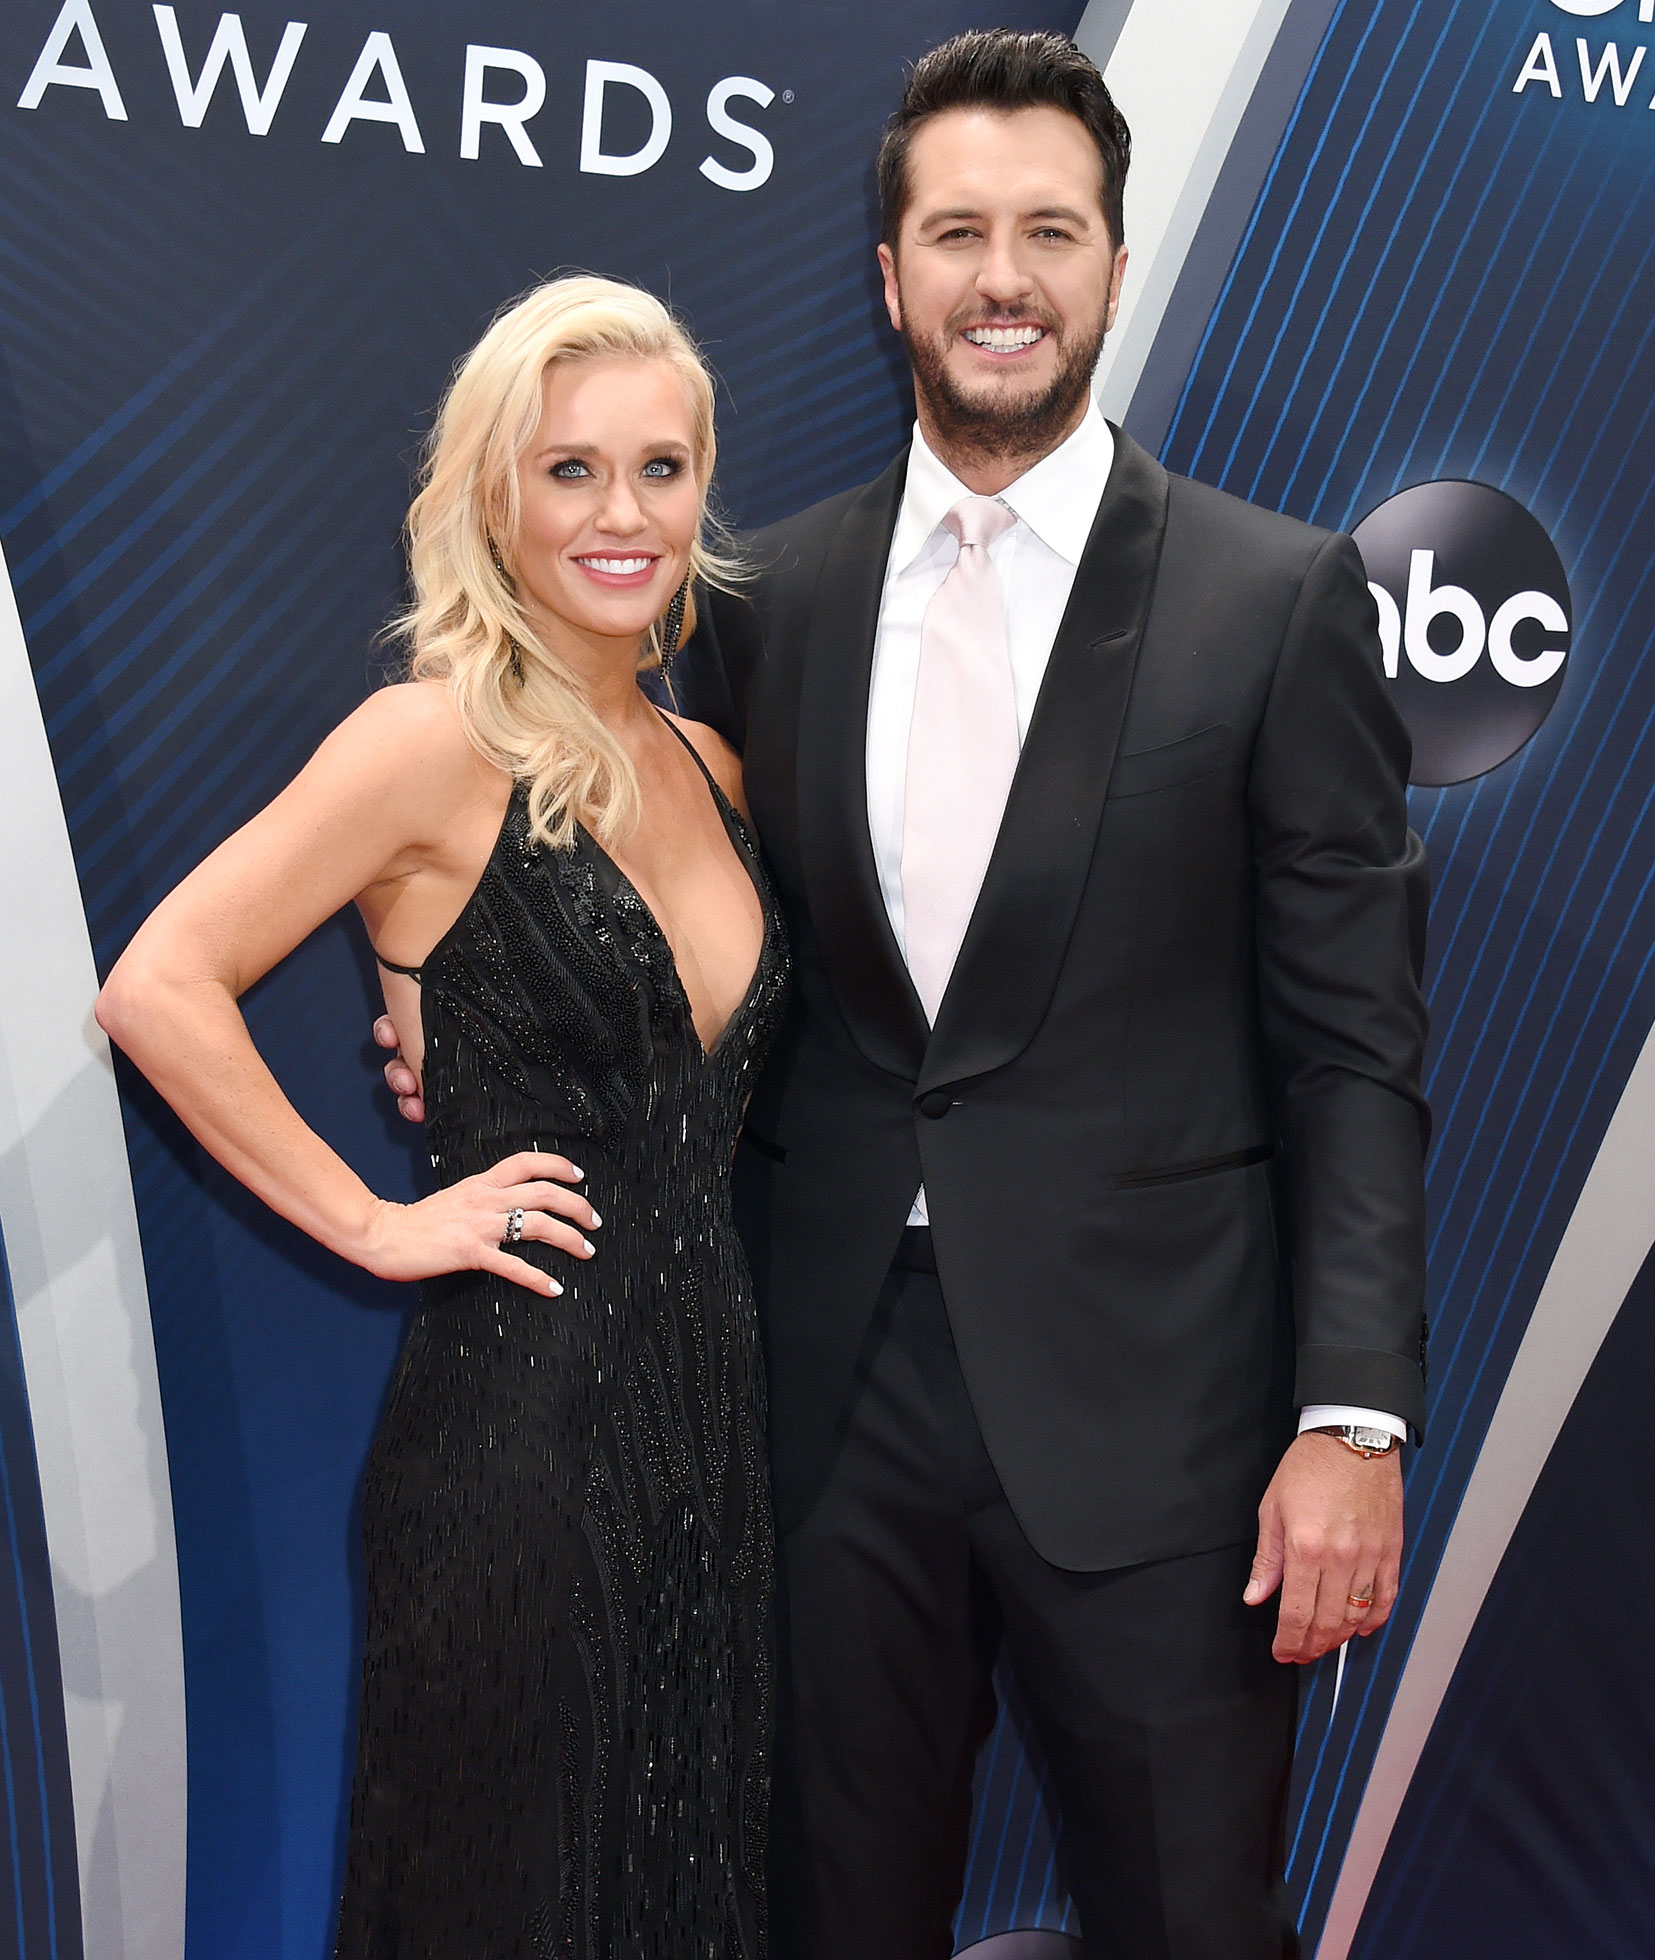 Luke Bryan Says Make-Up Sex Is the Secret to His Marriage